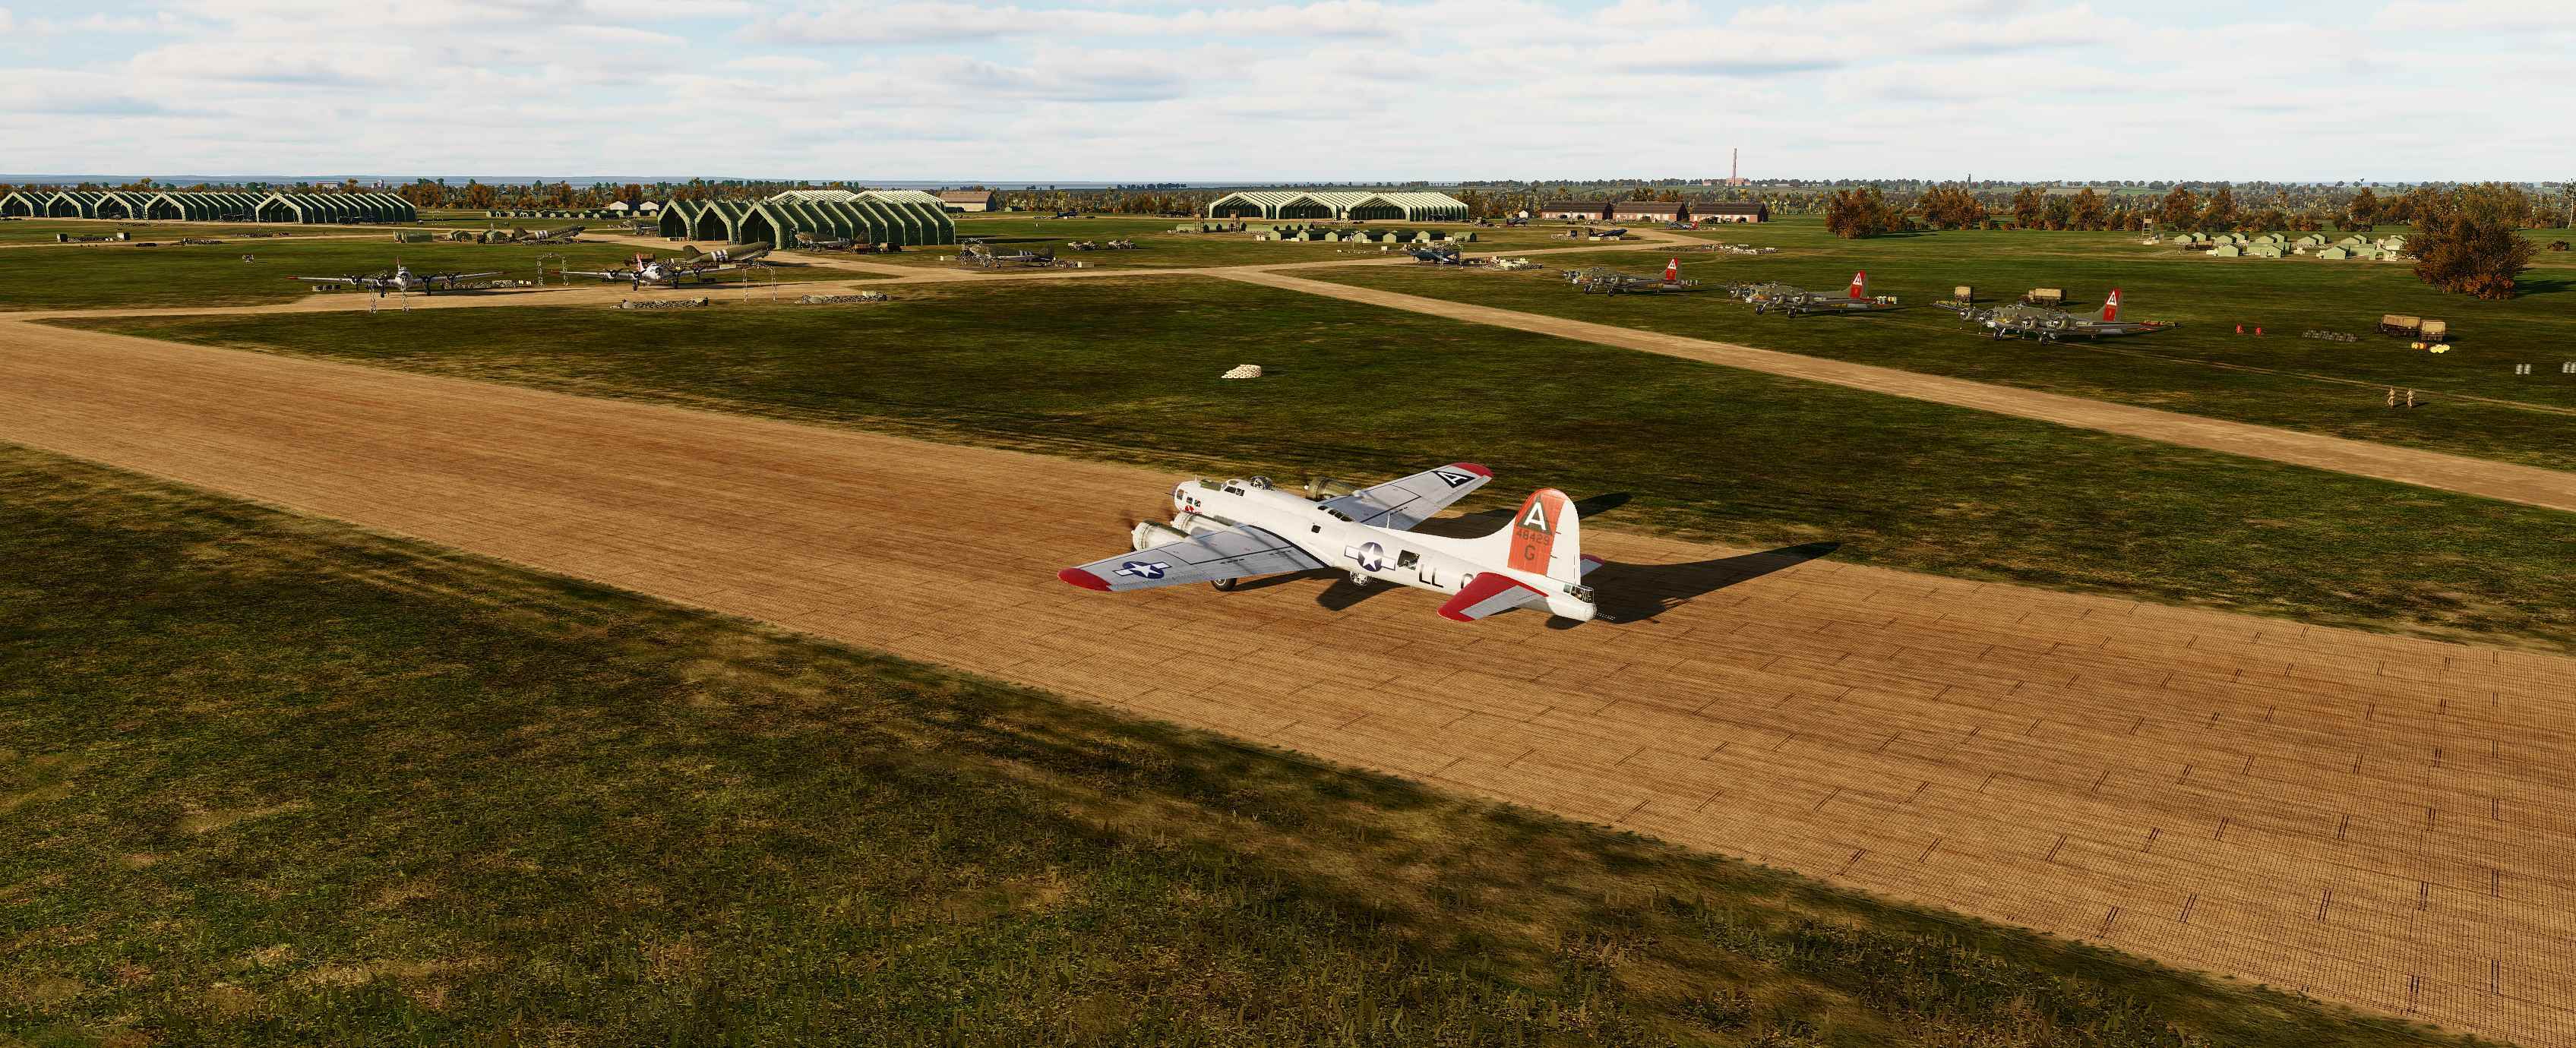 NORMANDY2 "Deux Jumeaux" (UPDATED)  USAAF Airfield